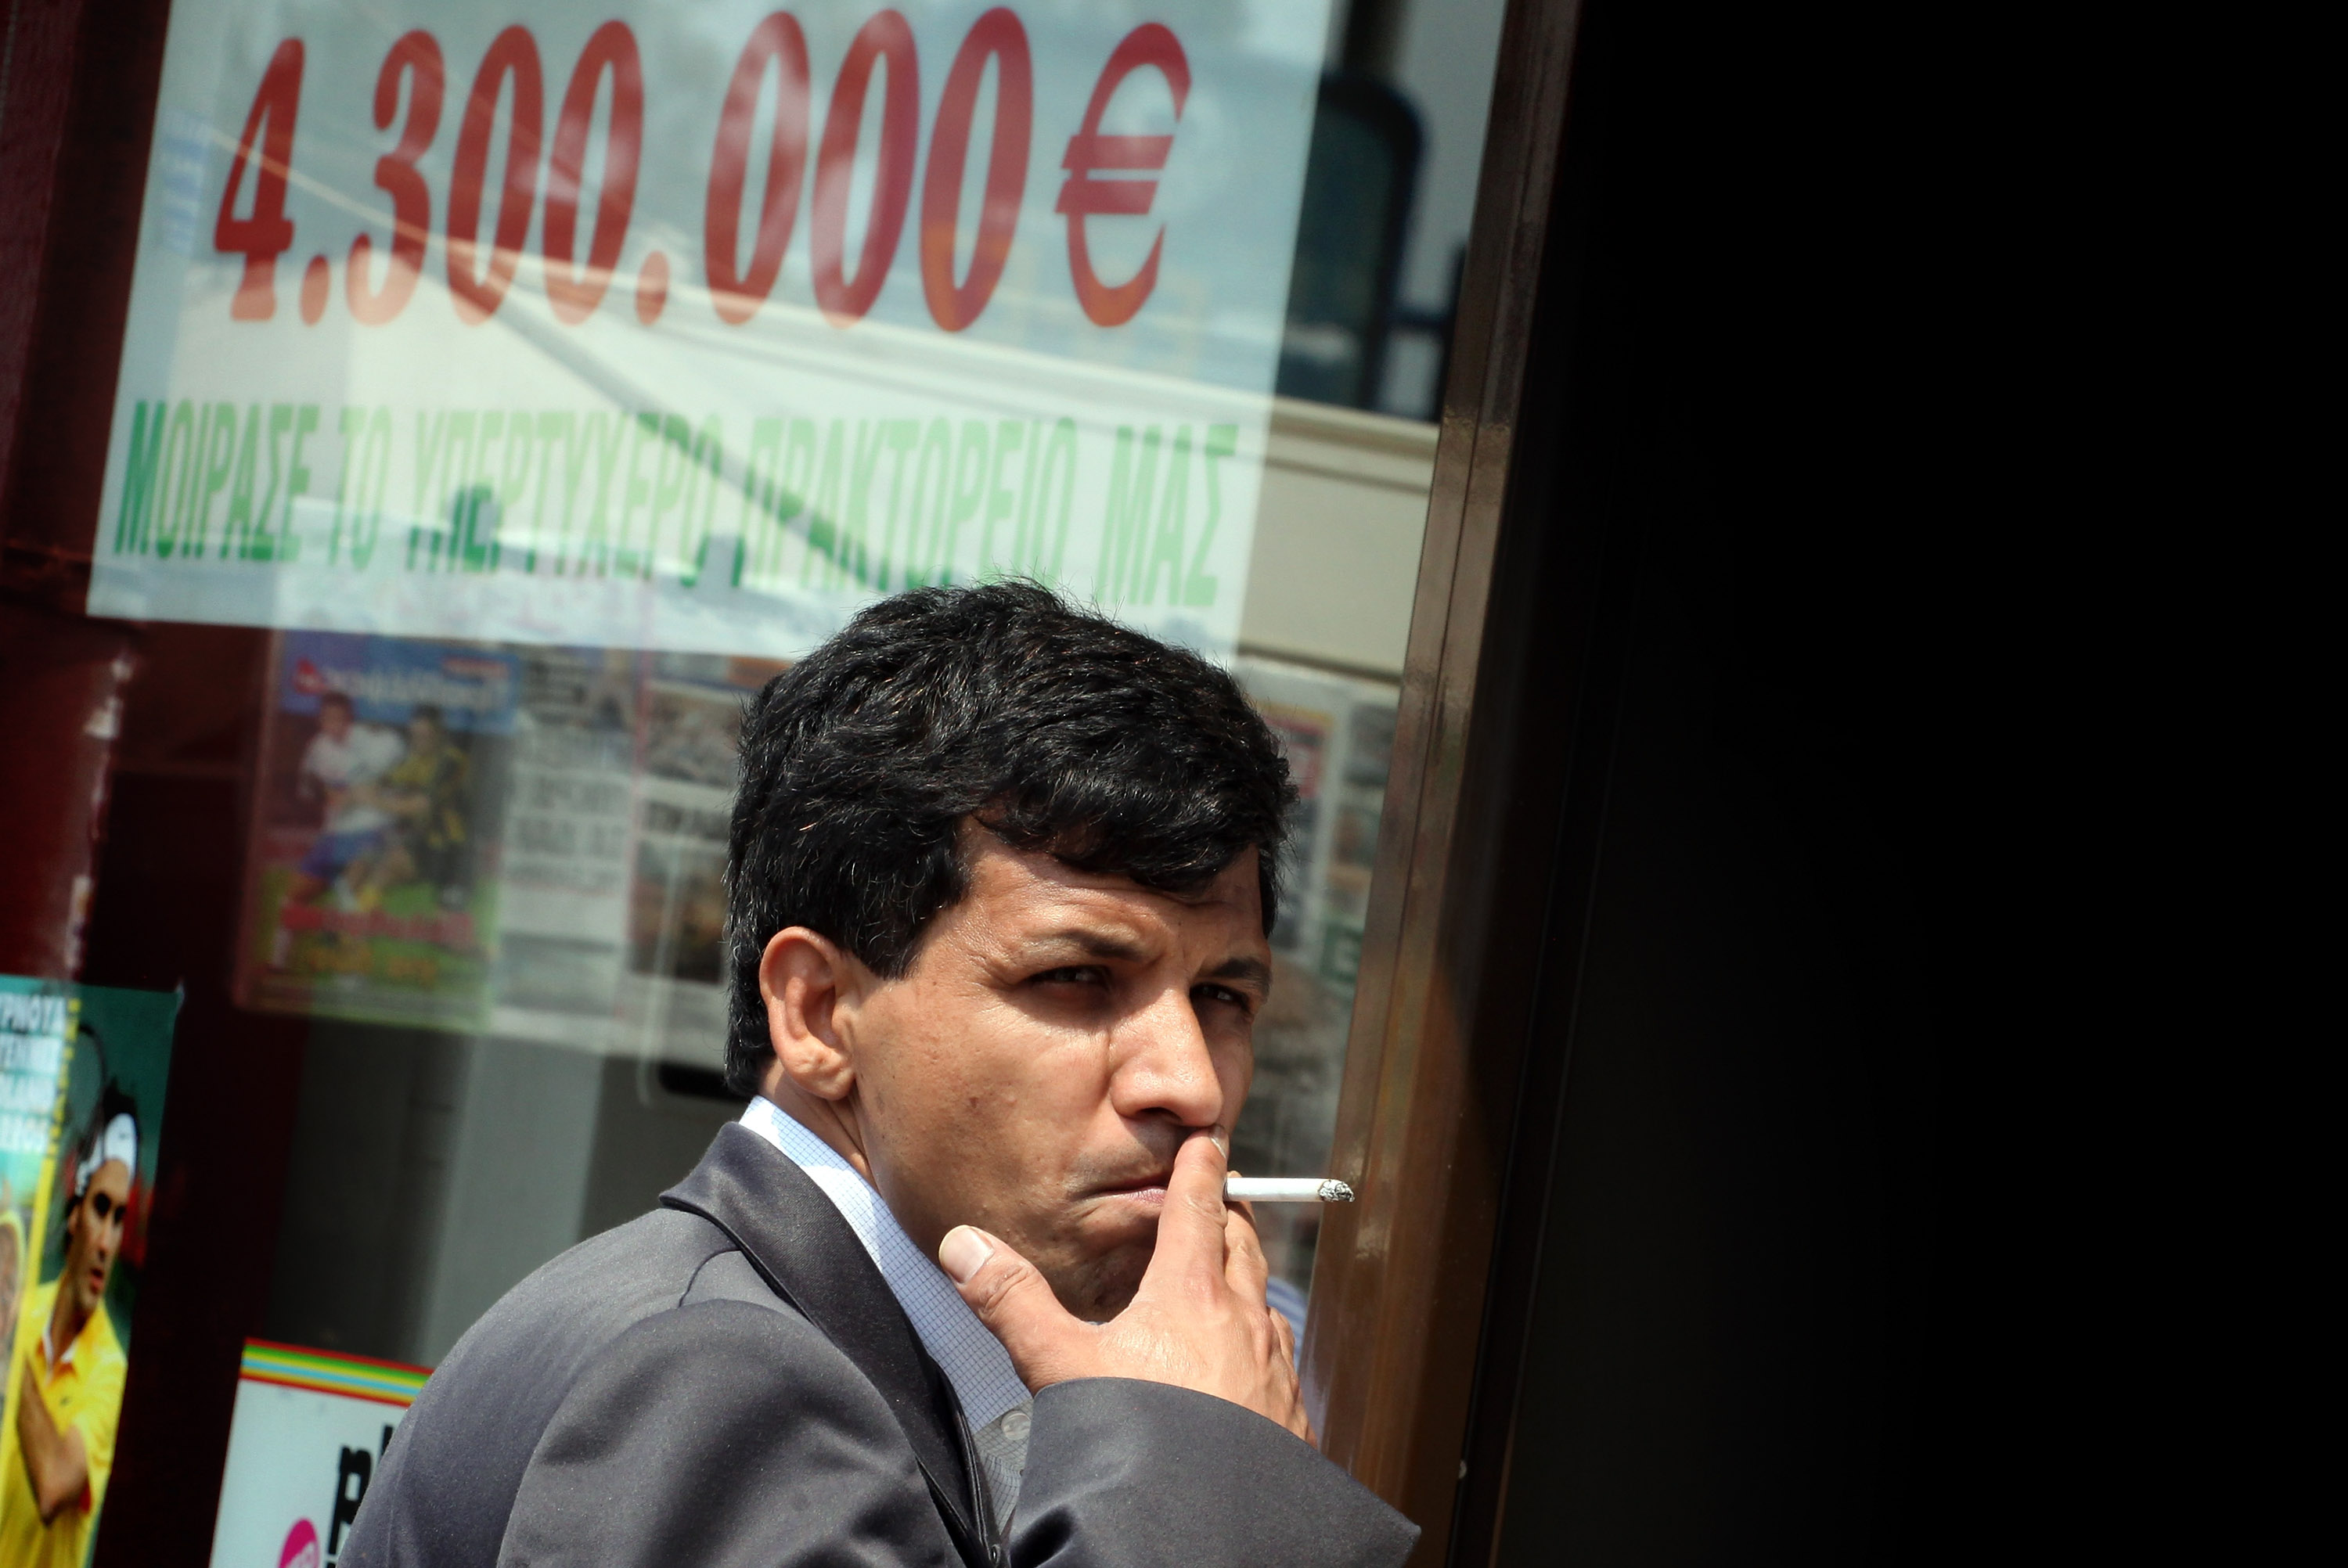 ATHENS, GREECE - MAY 31:  A man smokes a cigarette before entering a betting shop on May 31, 2011 in Pireas, the port of Athens, Greece. The Greek government is trying to implement a further round of severe austerity measures after EU finance officials have argued that the country, which is already struggling to meet the terms of an international euro110 billion bailout, could require even more help.  (Photo by Matt Cardy/Getty Images)